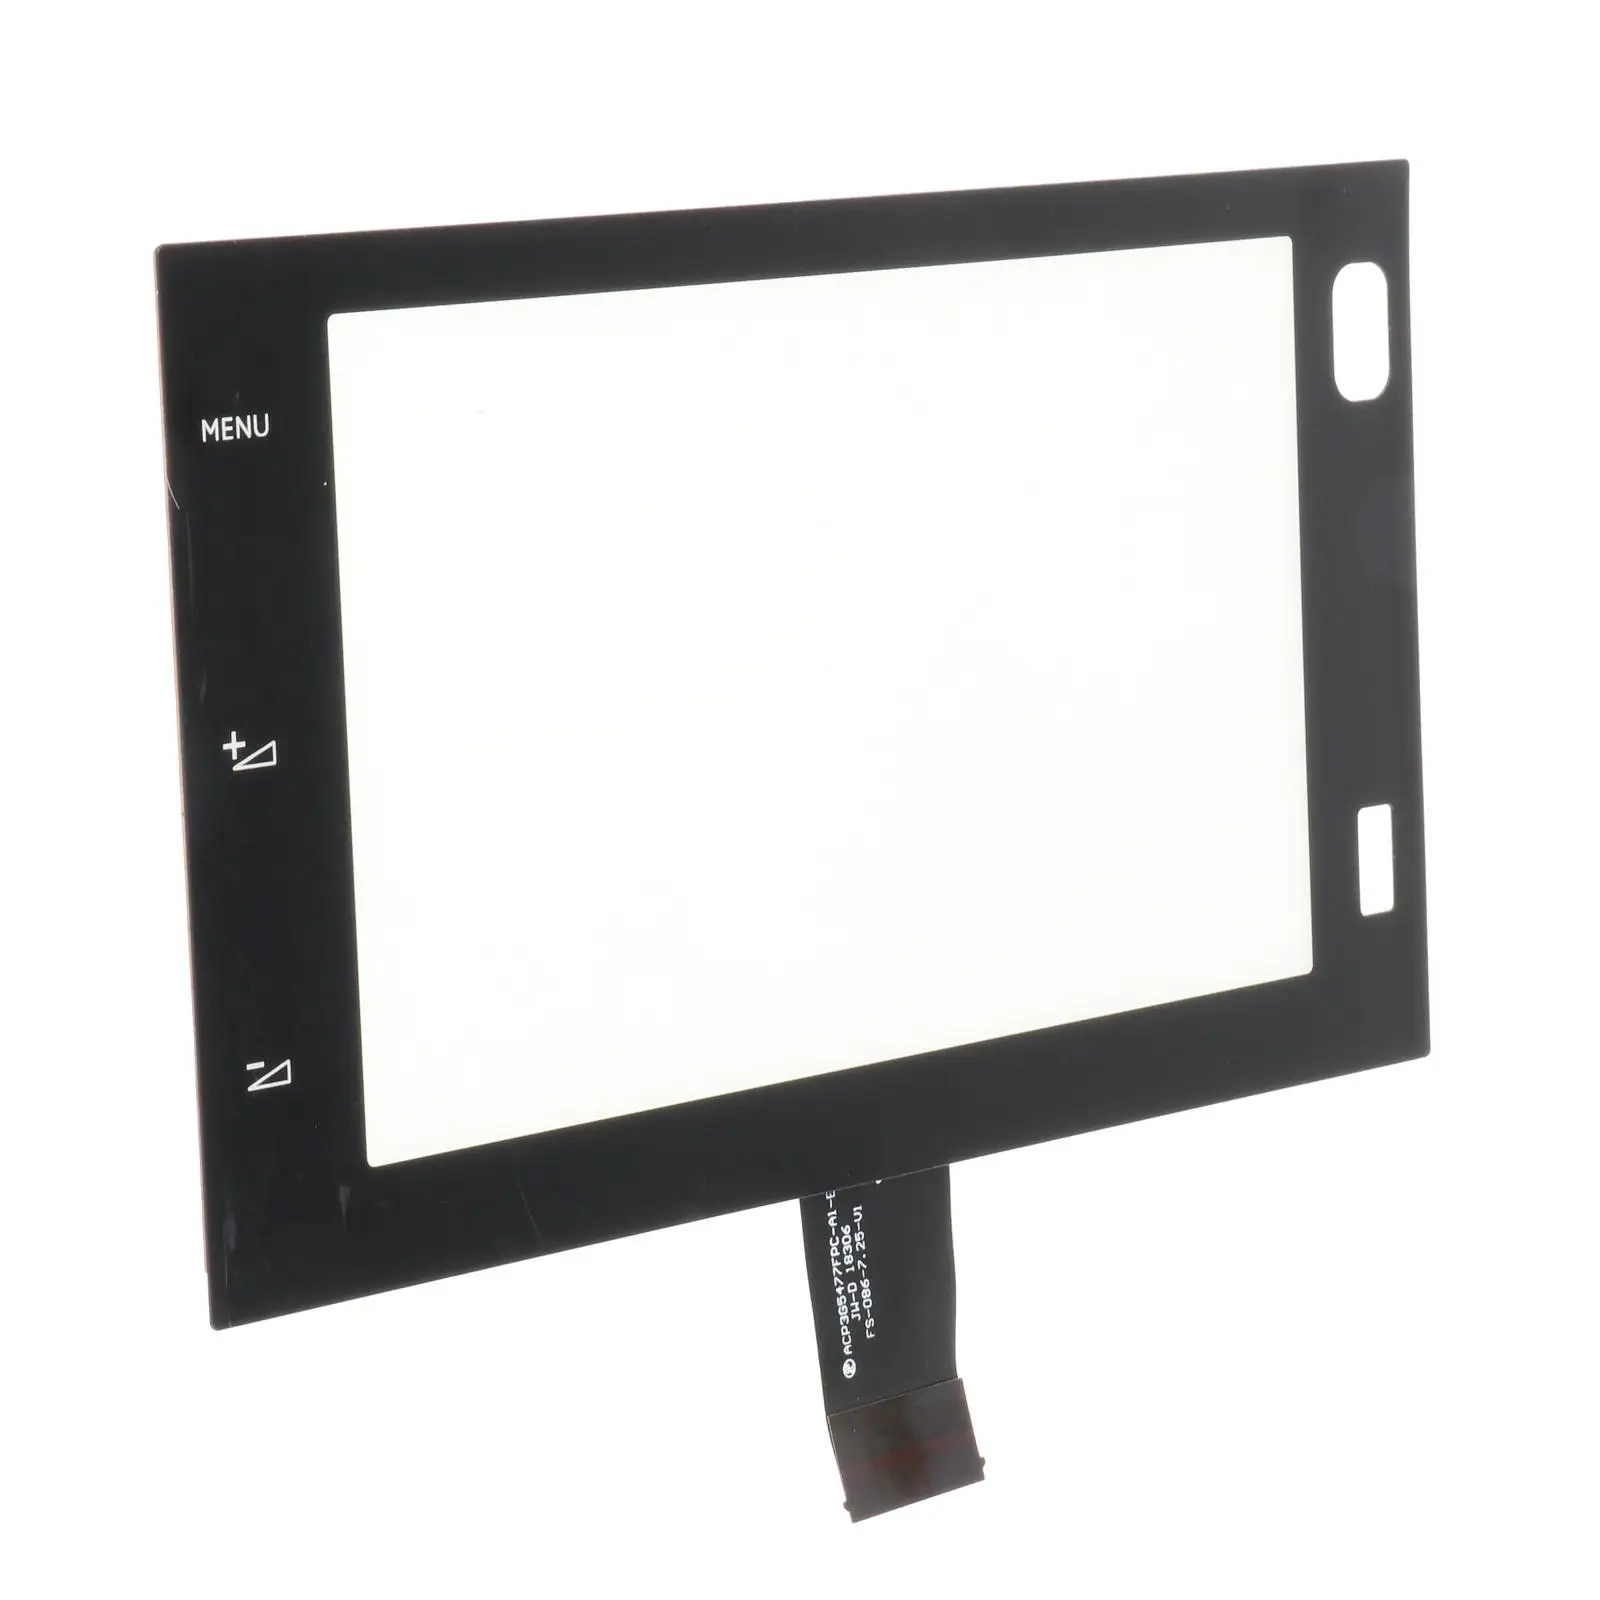 7inch Touch Digitizer Panel Car Monitors Metal In-Dash Replacement for SUV Peugeot 2008 Touchscreen Black Auto Parts